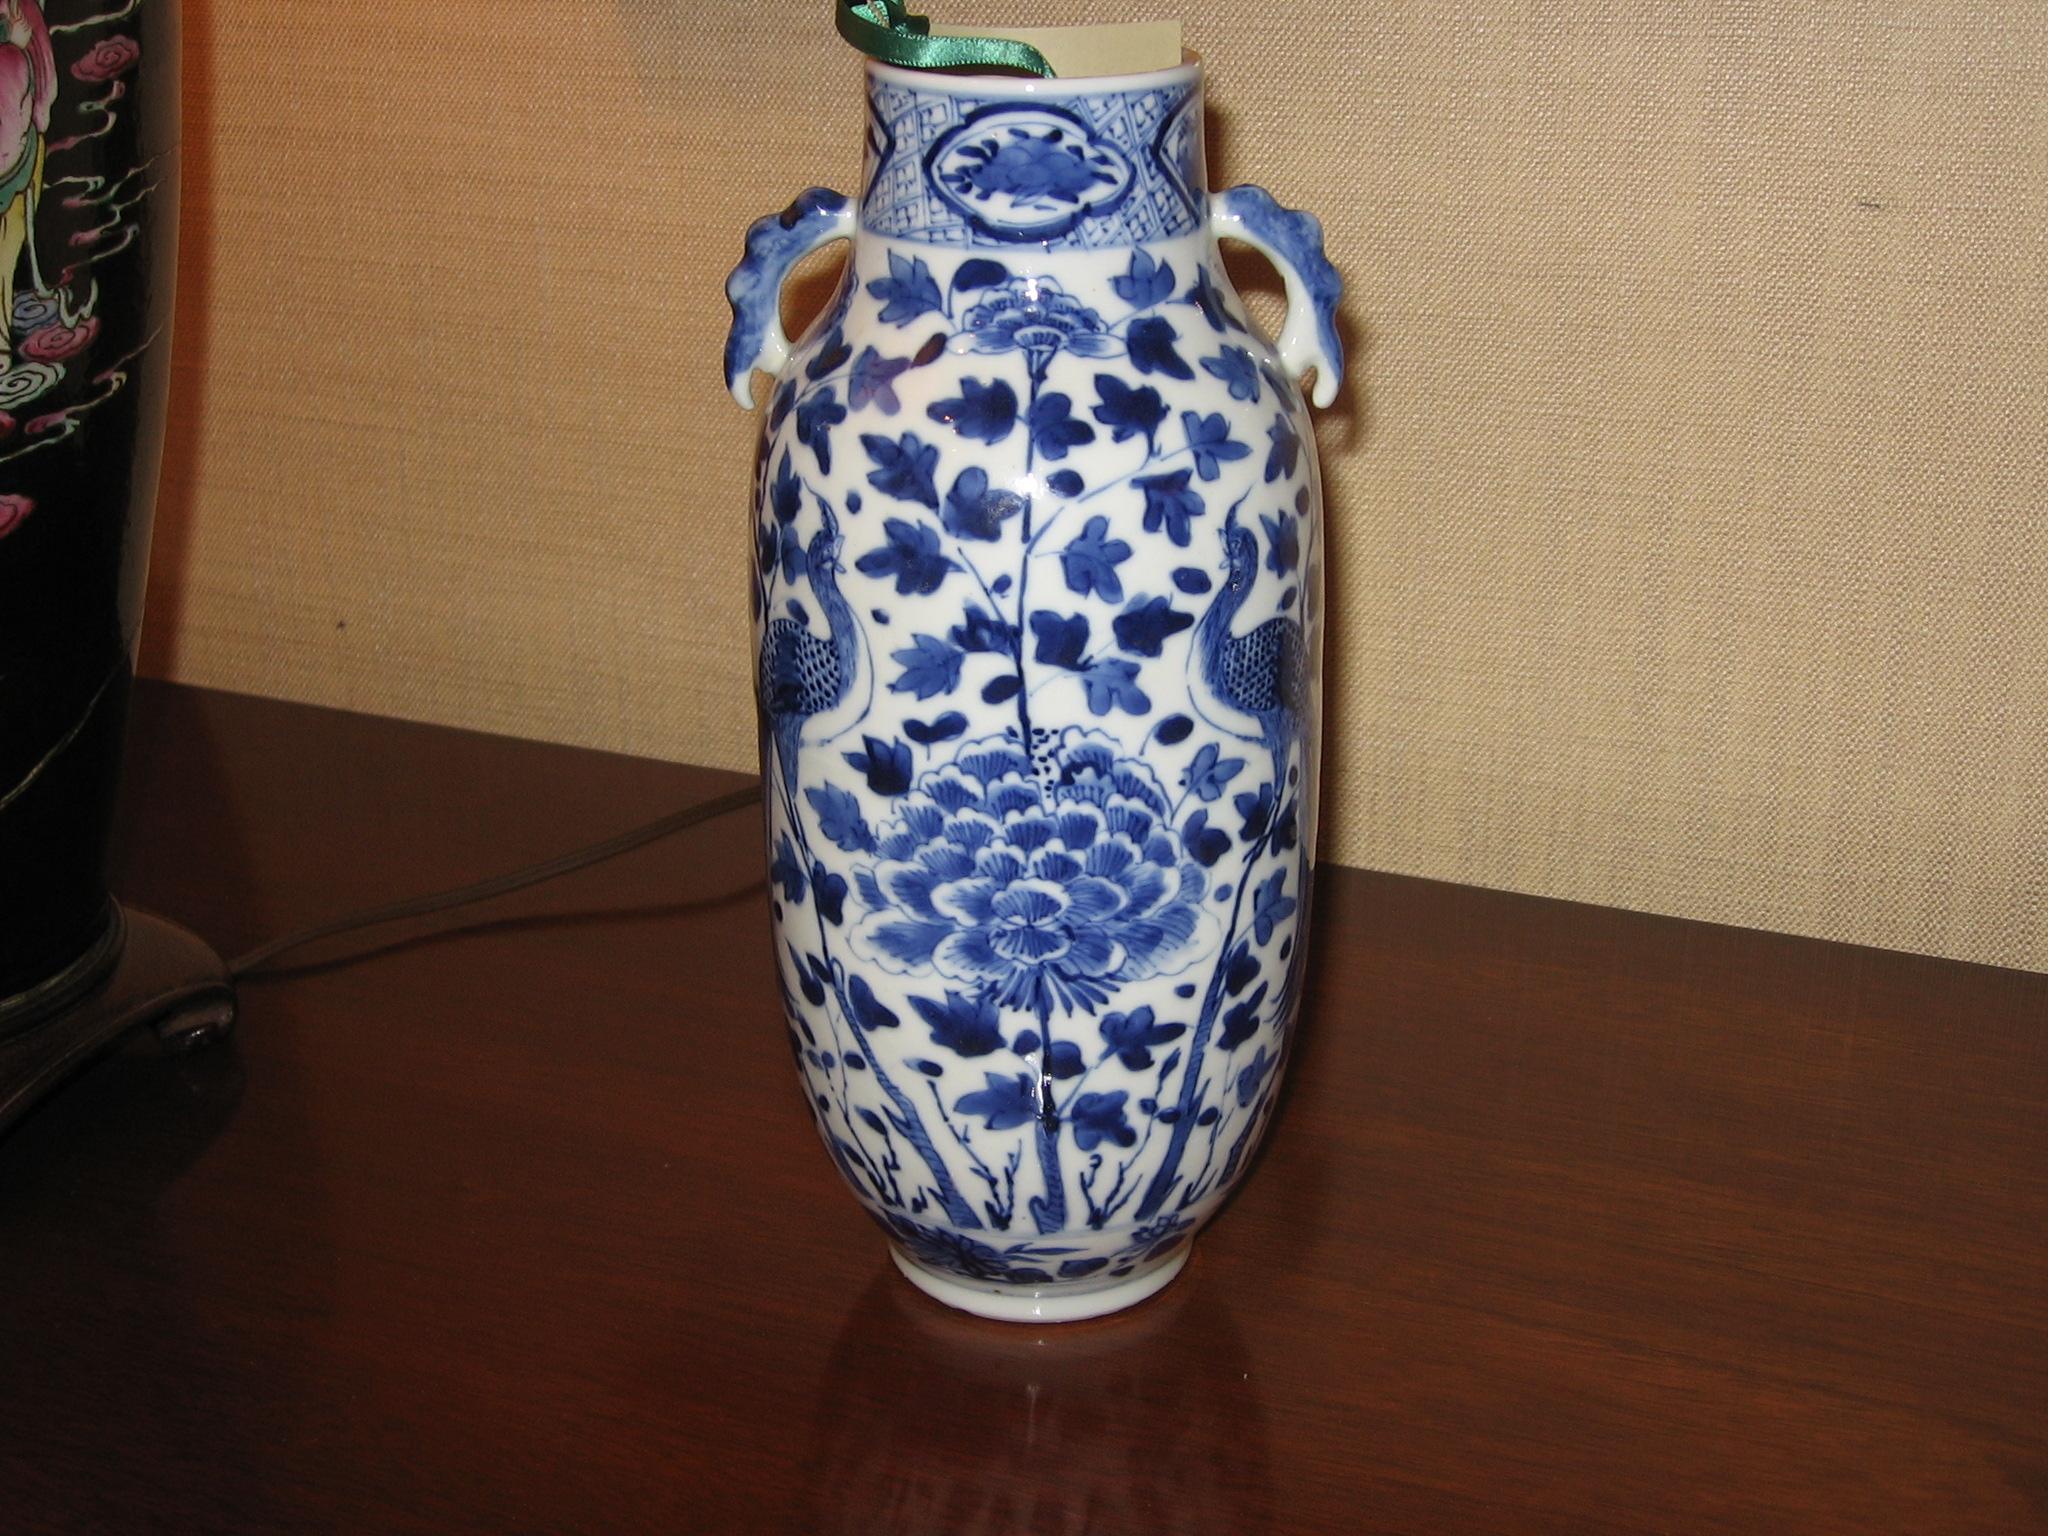 19th century Chinese hand painted Blue & White porcelain vase with interesting symmetrical pattern.